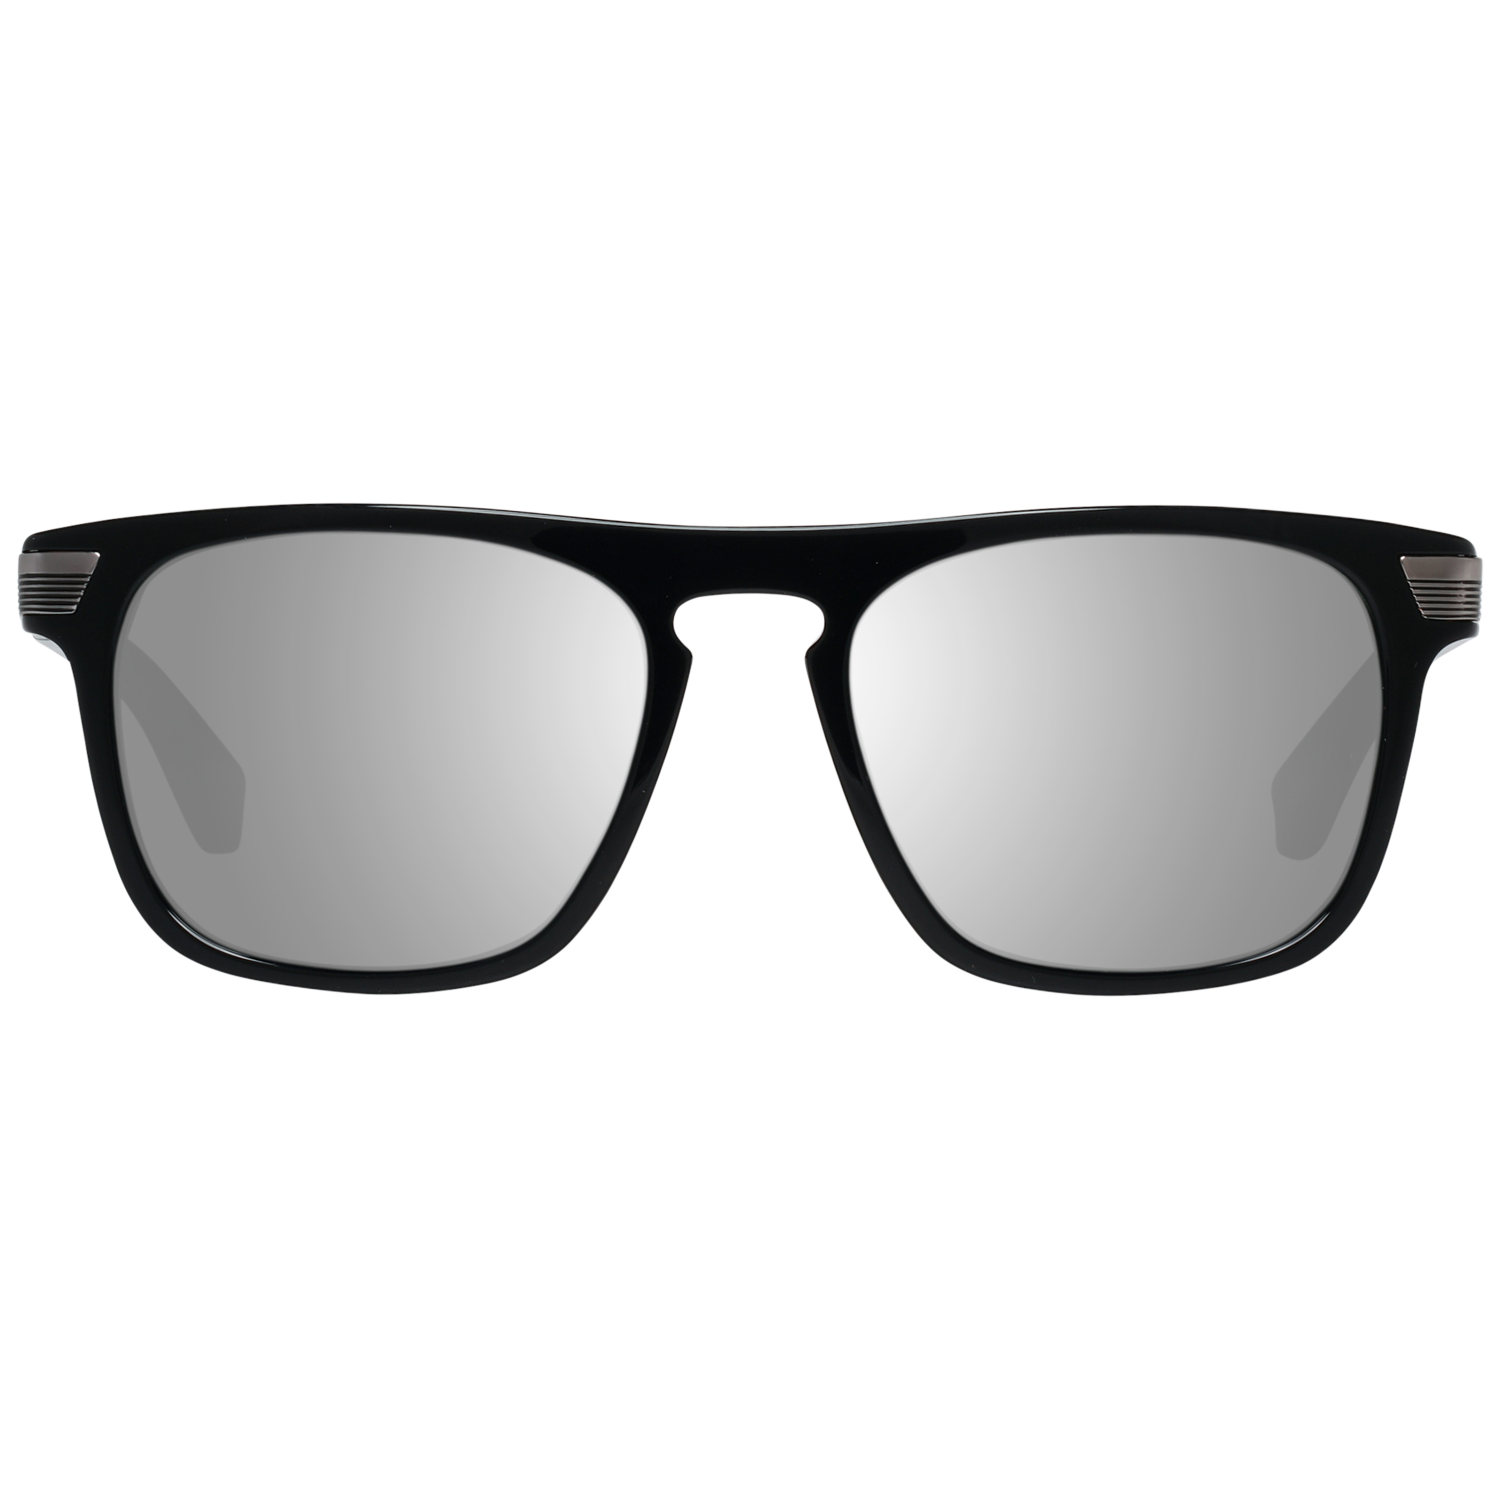 Harley-Davidson Sunglasses HD2037 01C 53 Men
Frame color: Black
Lenses color: Grey
Lenses material: Plastic
Filter category: 3
Style: Trapezium
Lenses effect: Mirrored
Protection: 100% UVA & UVB
Size: 53-18-145
Lenses width: 53
Lenses height: 42
Bridge width: 18
Frame width: 145
Temples length: 145
Shipment includes: Case, cleaning cloth
Spring hinge: No